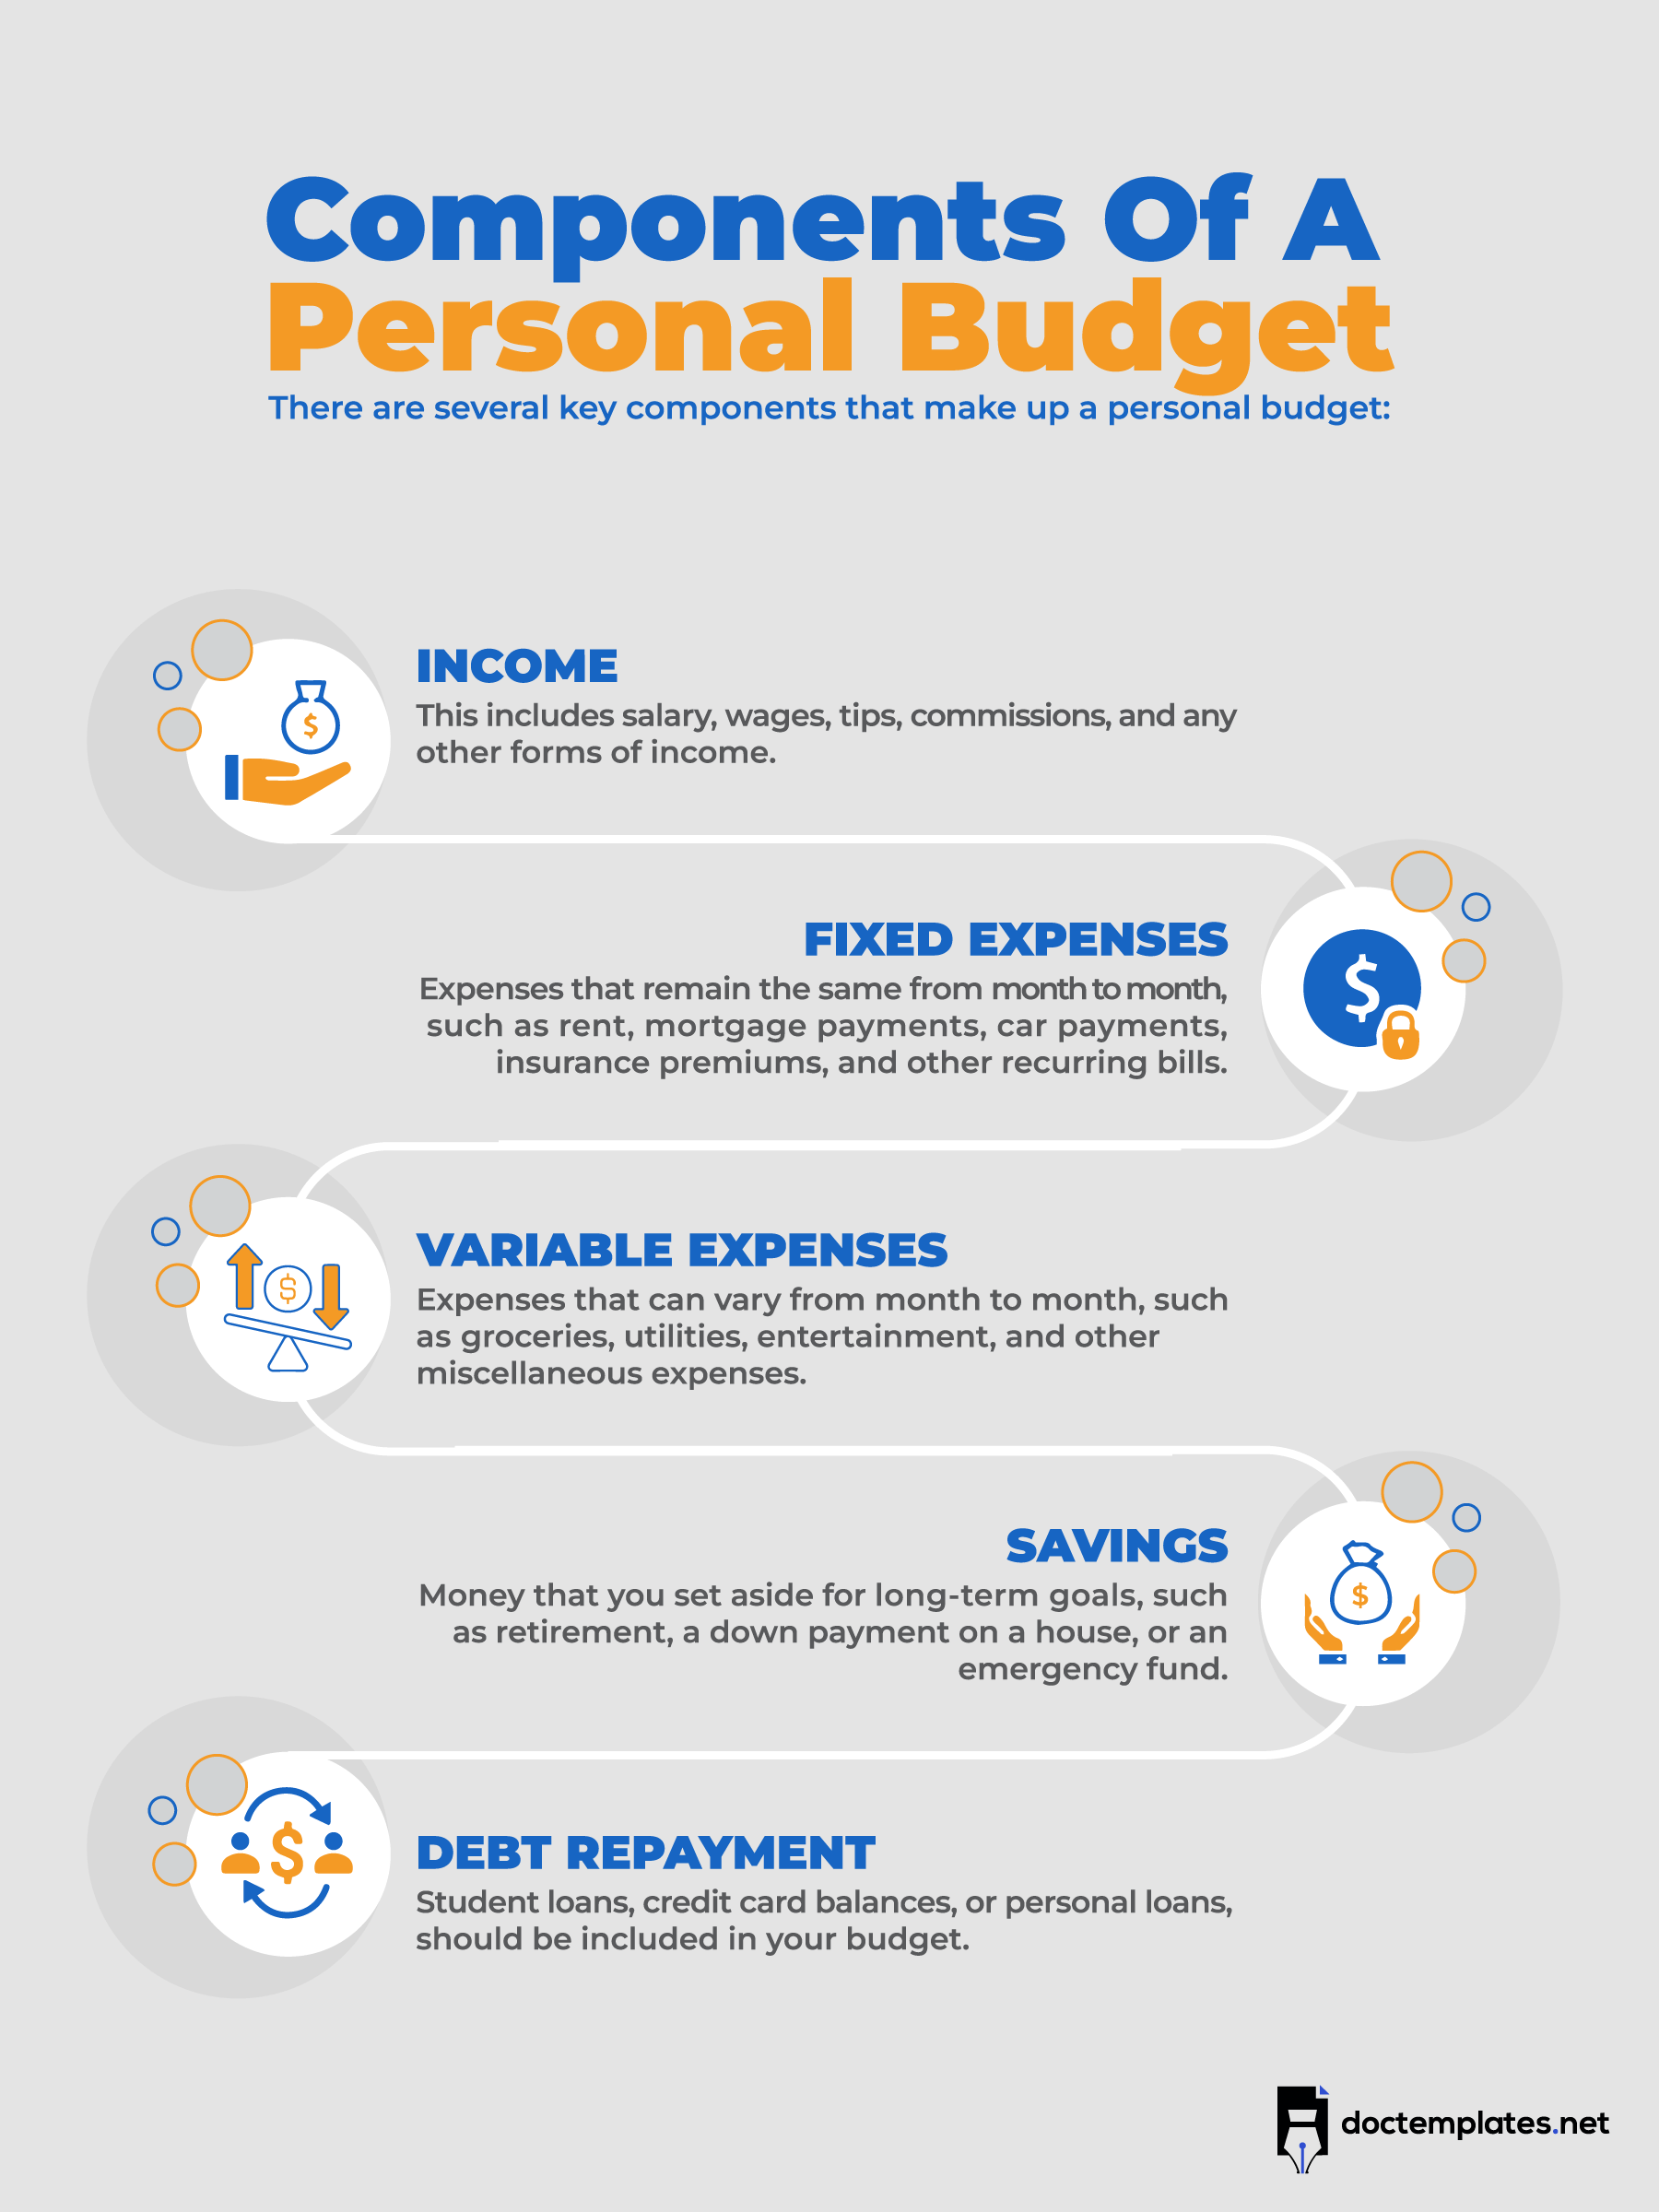 This infographic is about personal budget components.